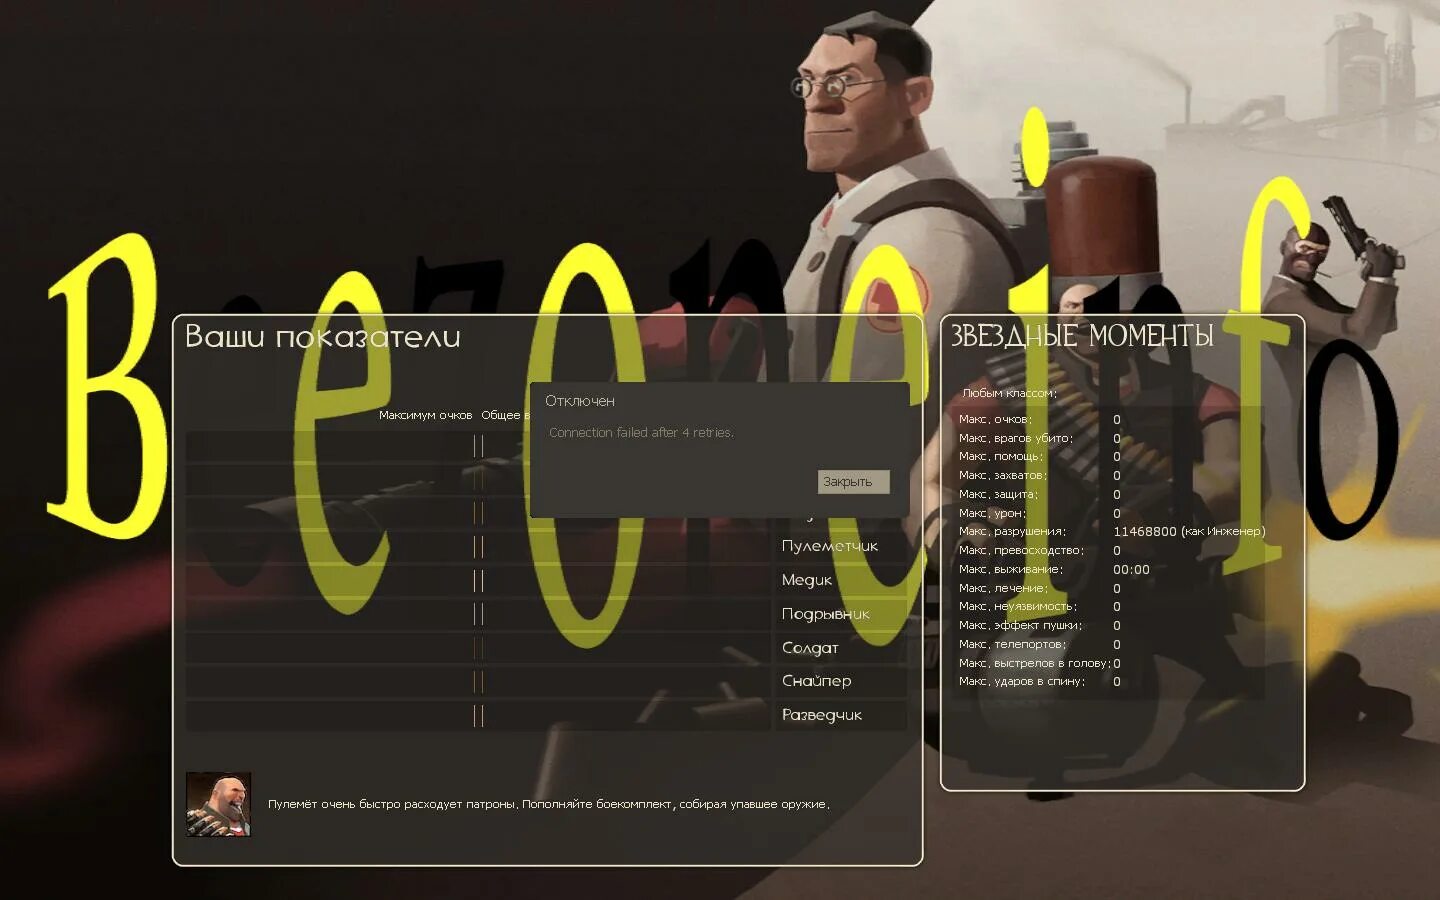 Connection failed after 4 retries. Connection failed after 4 retries tf2. Connection failed after 6 retries. Ошибка connection failed after 6 retries в Garry's Mod. Connection failed rust